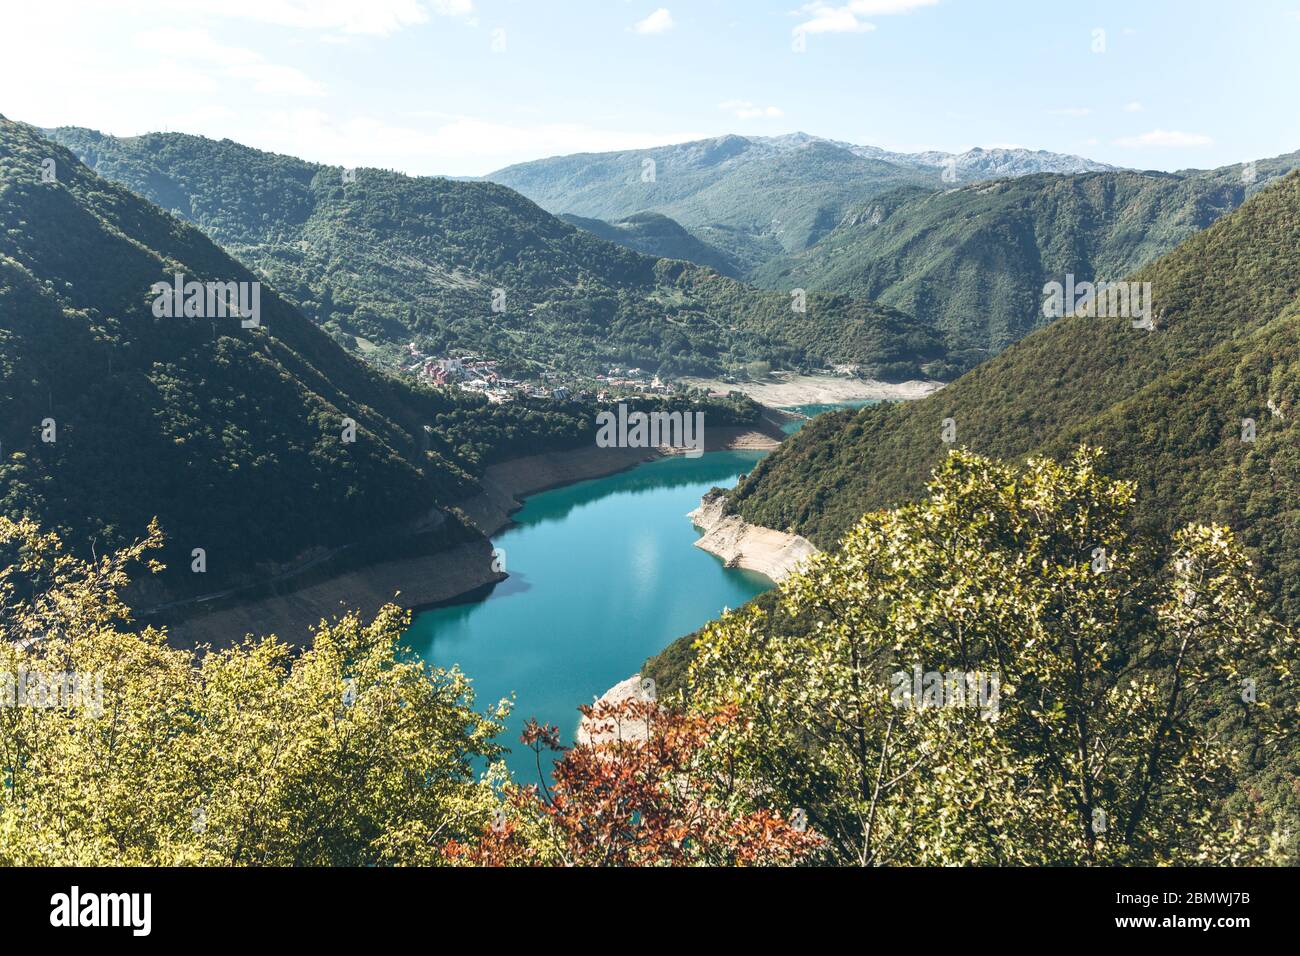 Beautiful view of the natural landscape in Montenegro. Piva reservoir with turquoise water. Stock Photo